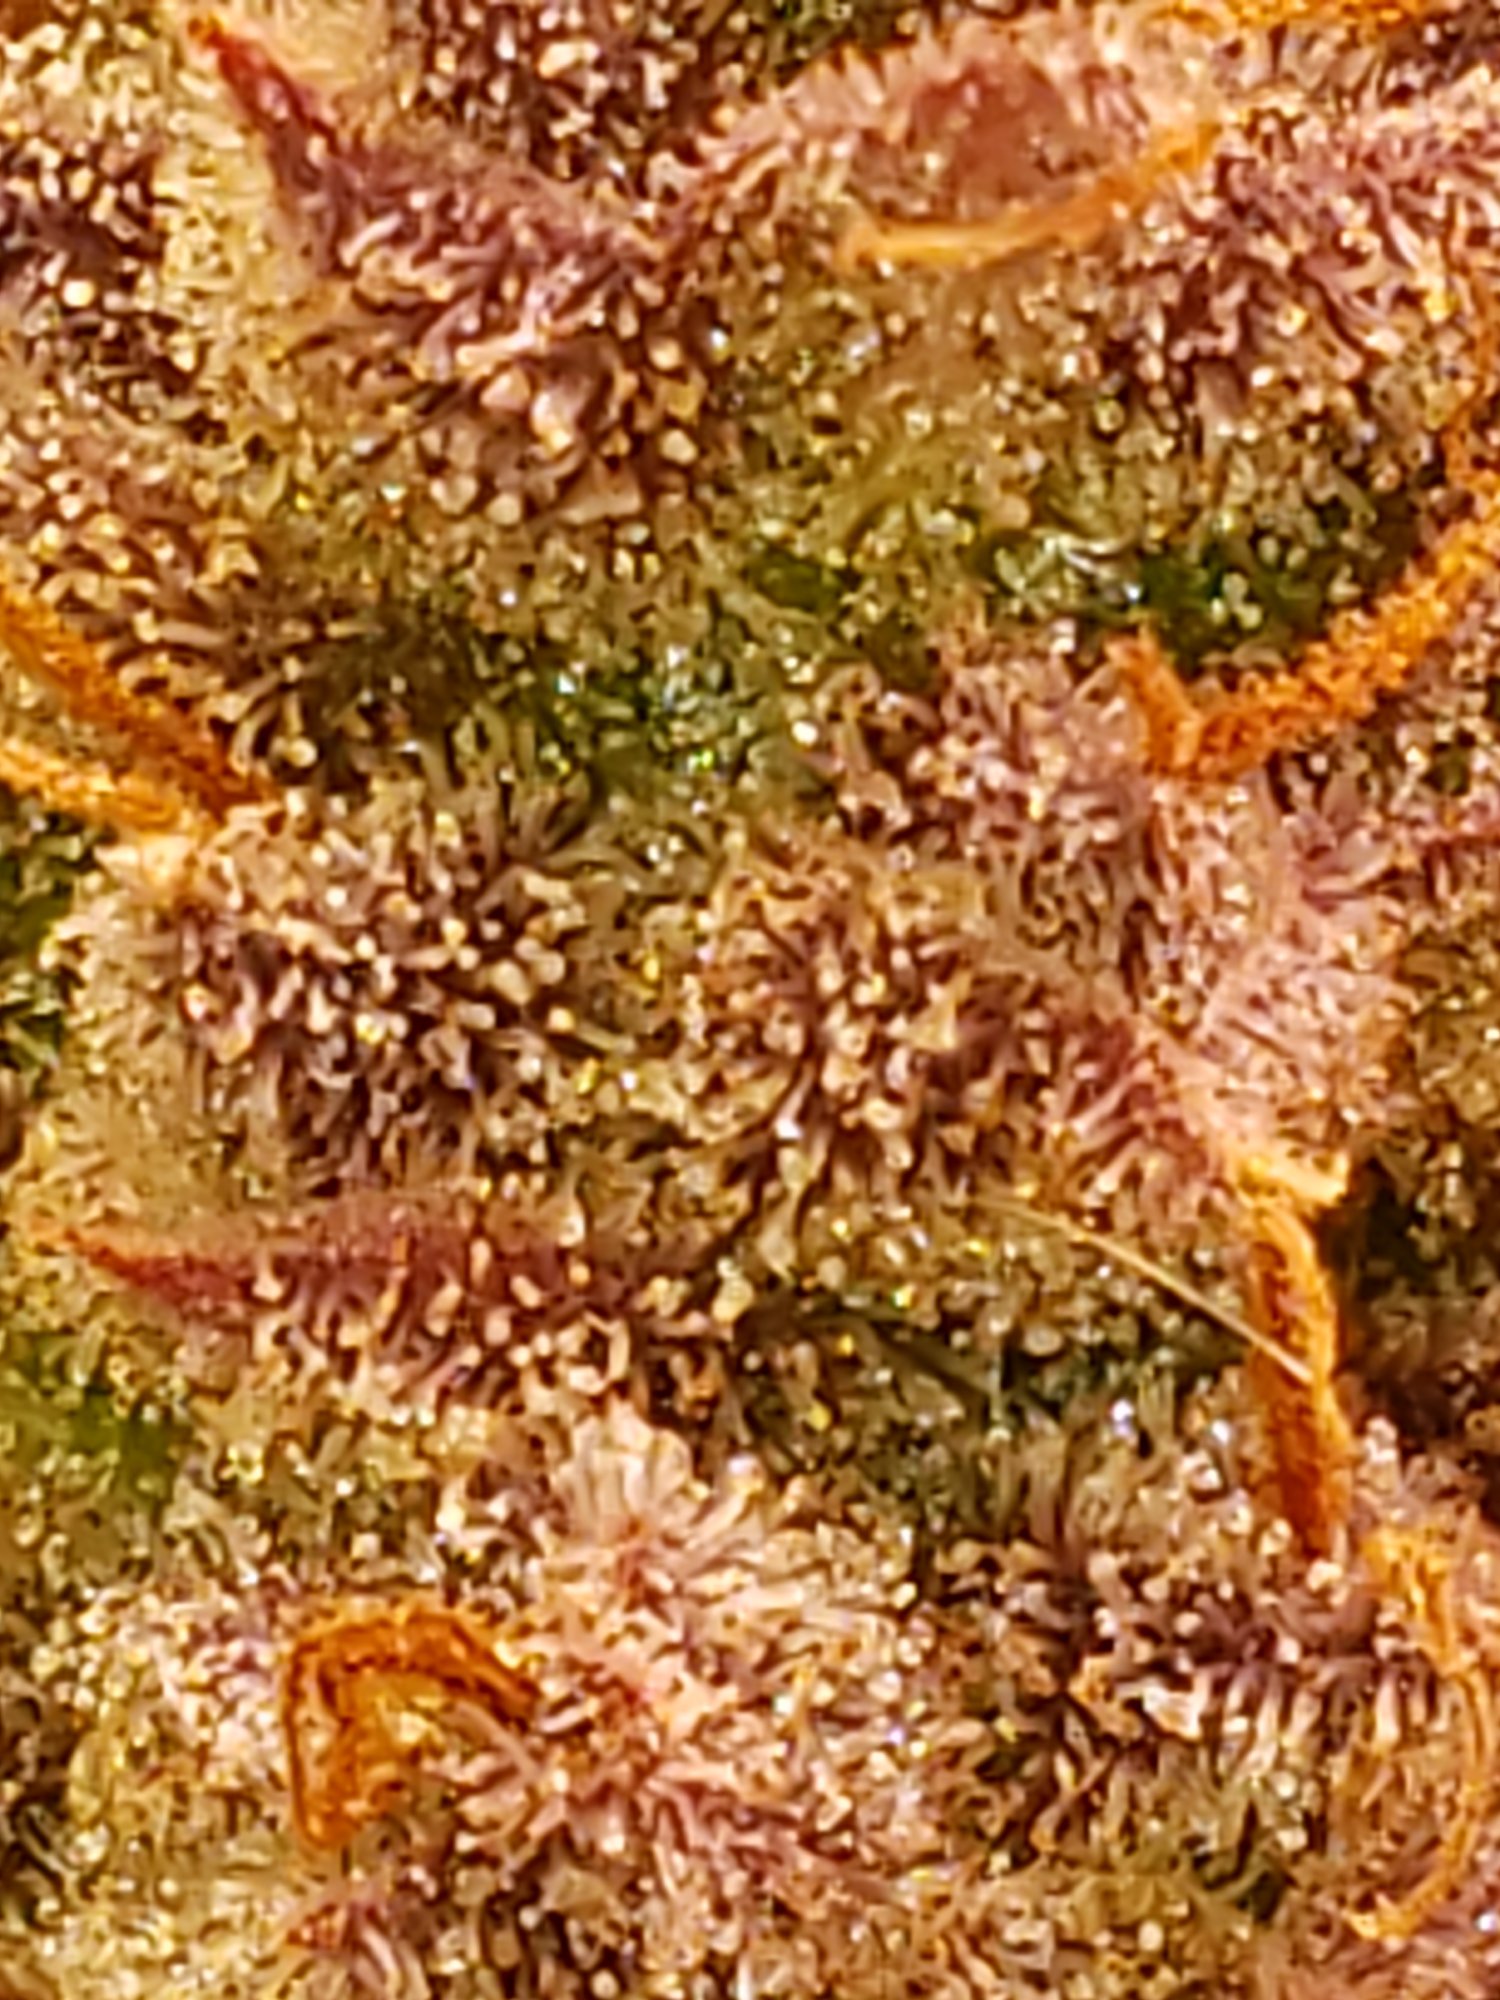 Trichomes and when to harvest 3